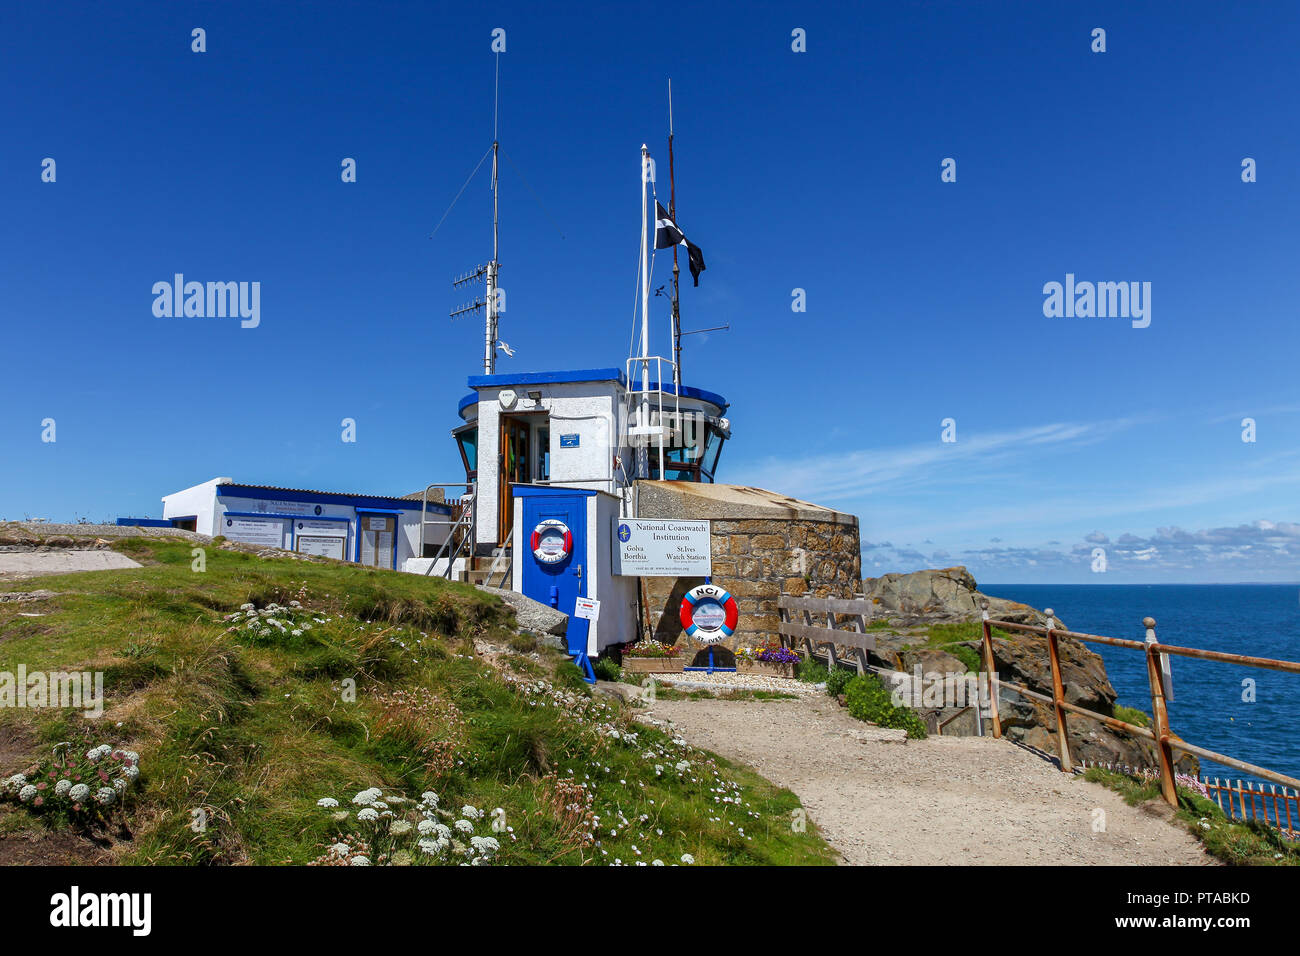 The St. Ives watch tower, run by the National Coastwatch Institution, a voluntary organisation and registered charity, St. Ives, Cornwall, England, UK Stock Photo